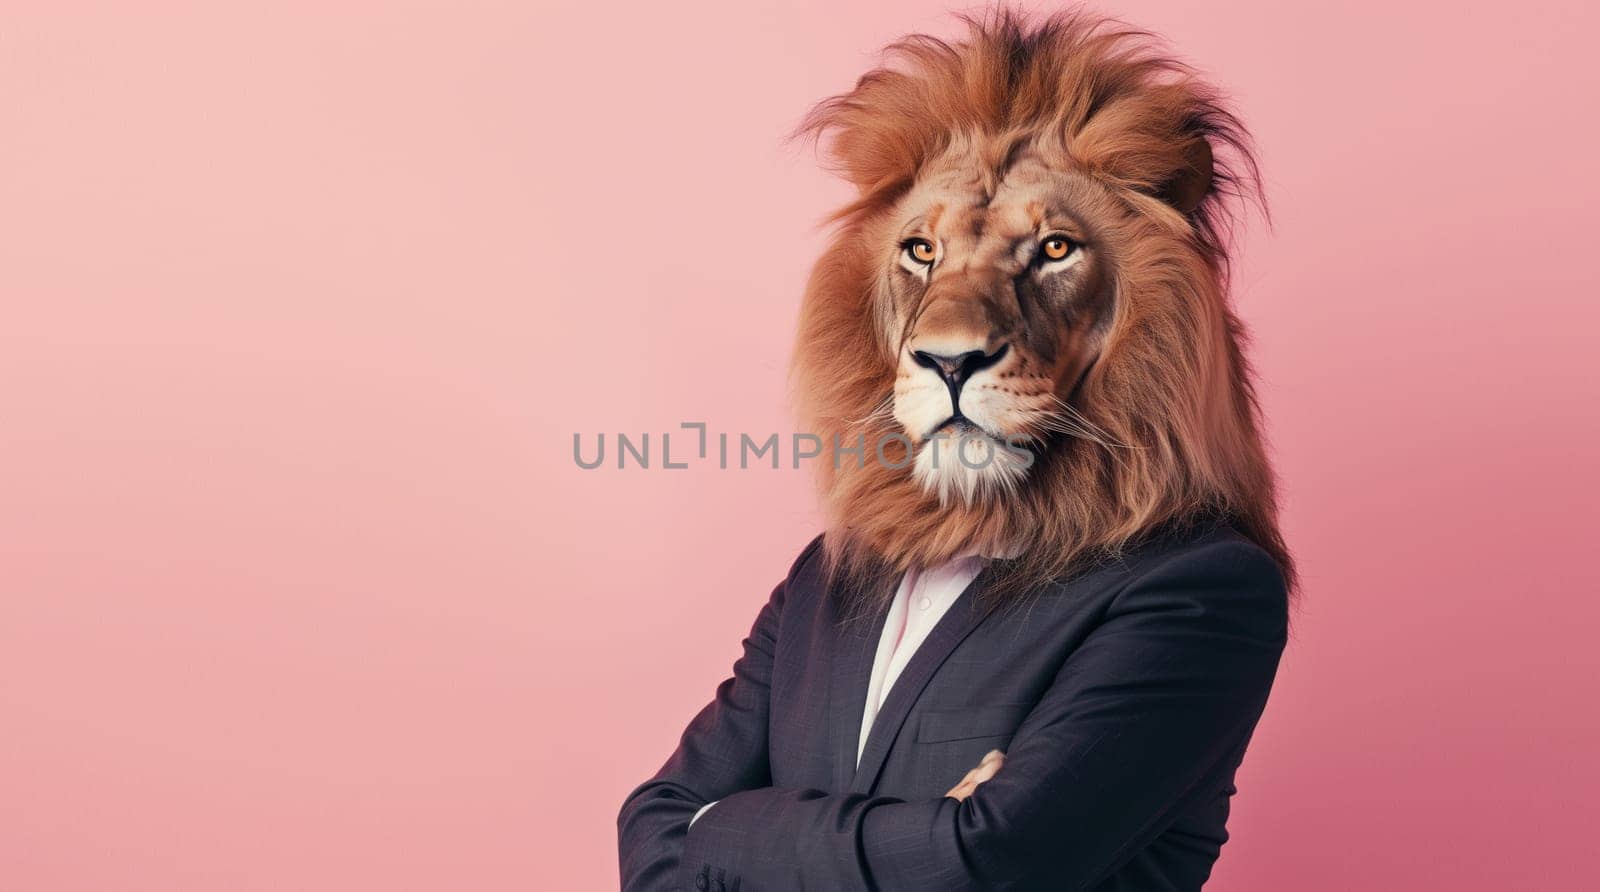 Portrait of confident stylish lion businessman in a suit with crossed arms looking at the camera on a pink background, business, animal, creative concept